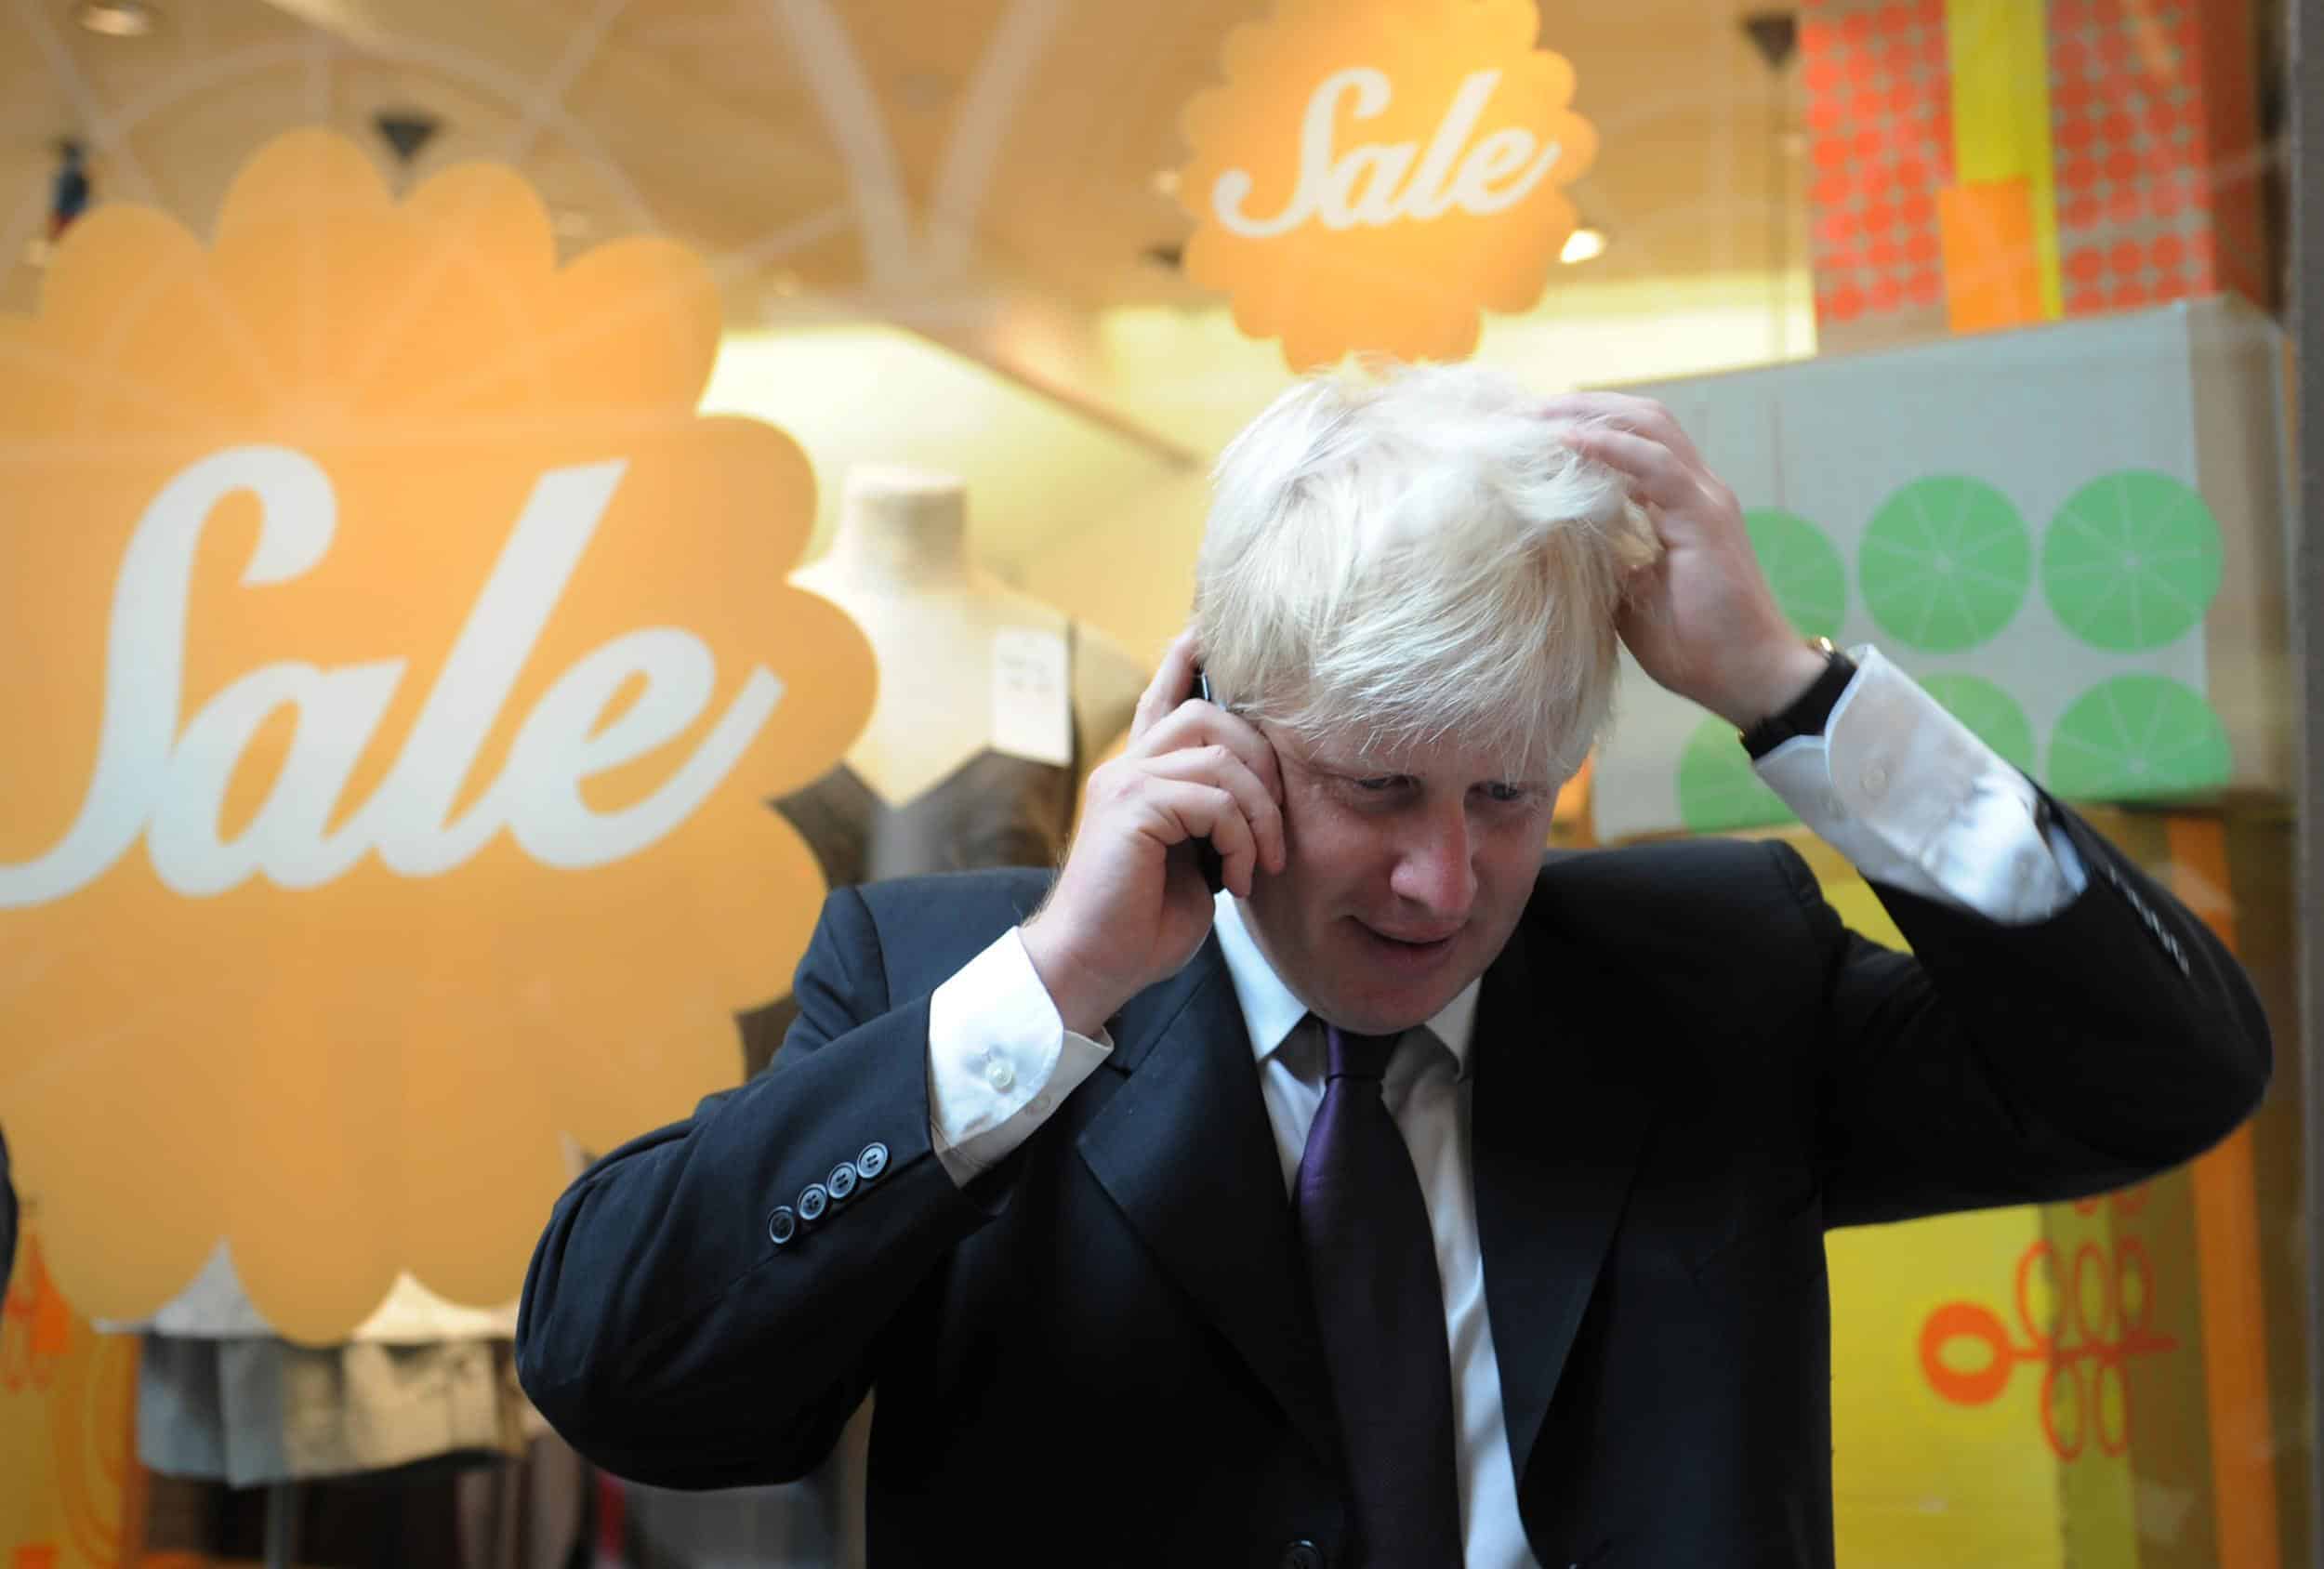 Boris Johnson’s political comeback hopes dashed by Tory candidate’s firm stand